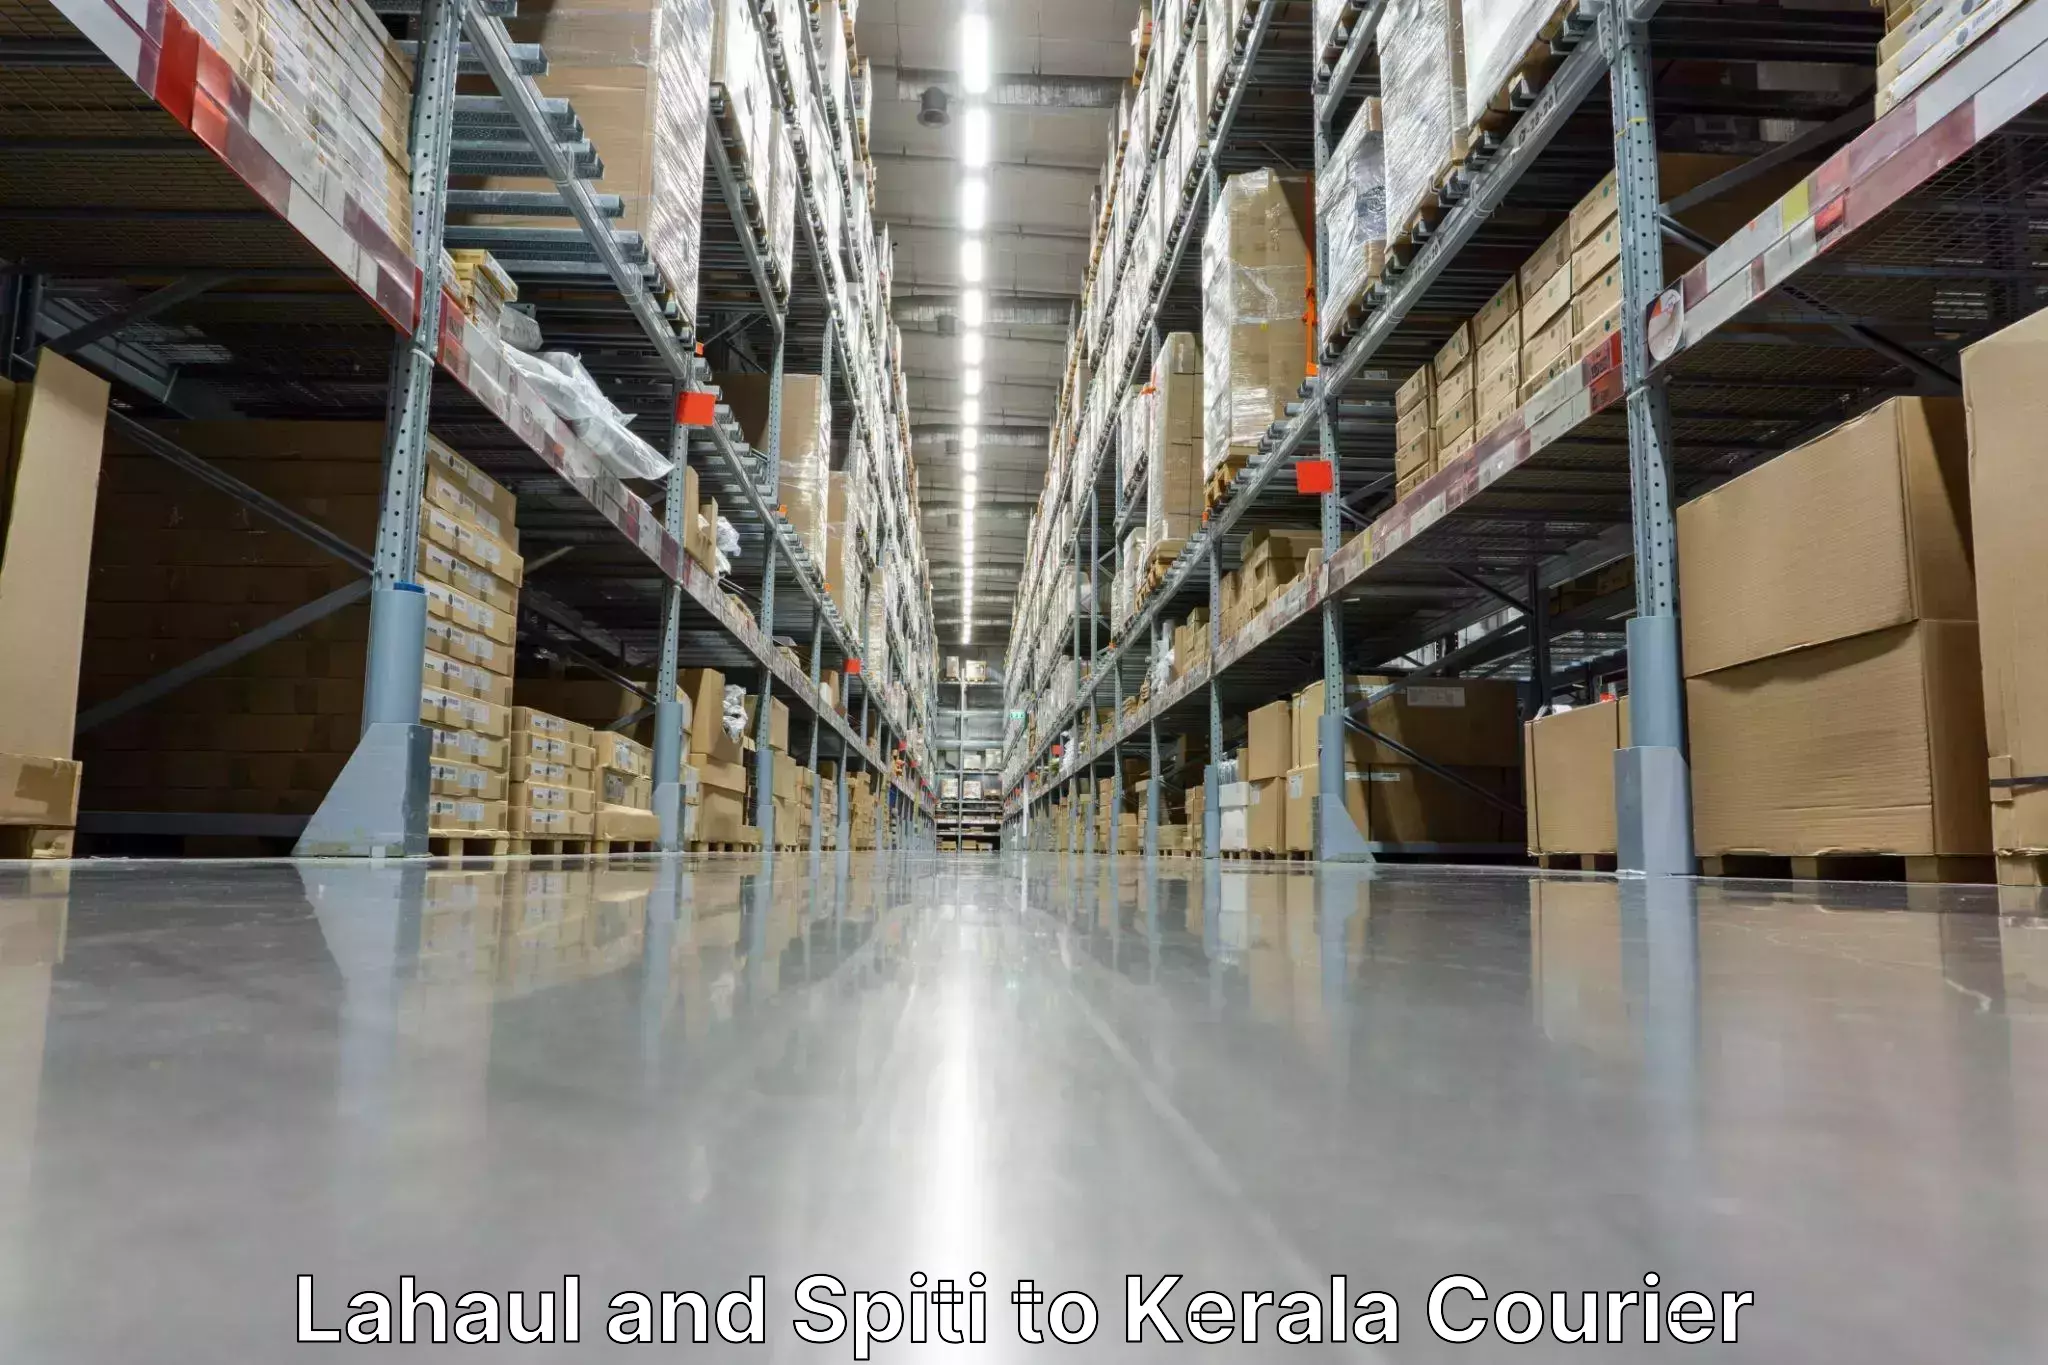 Quality courier partnerships Lahaul and Spiti to Kochi